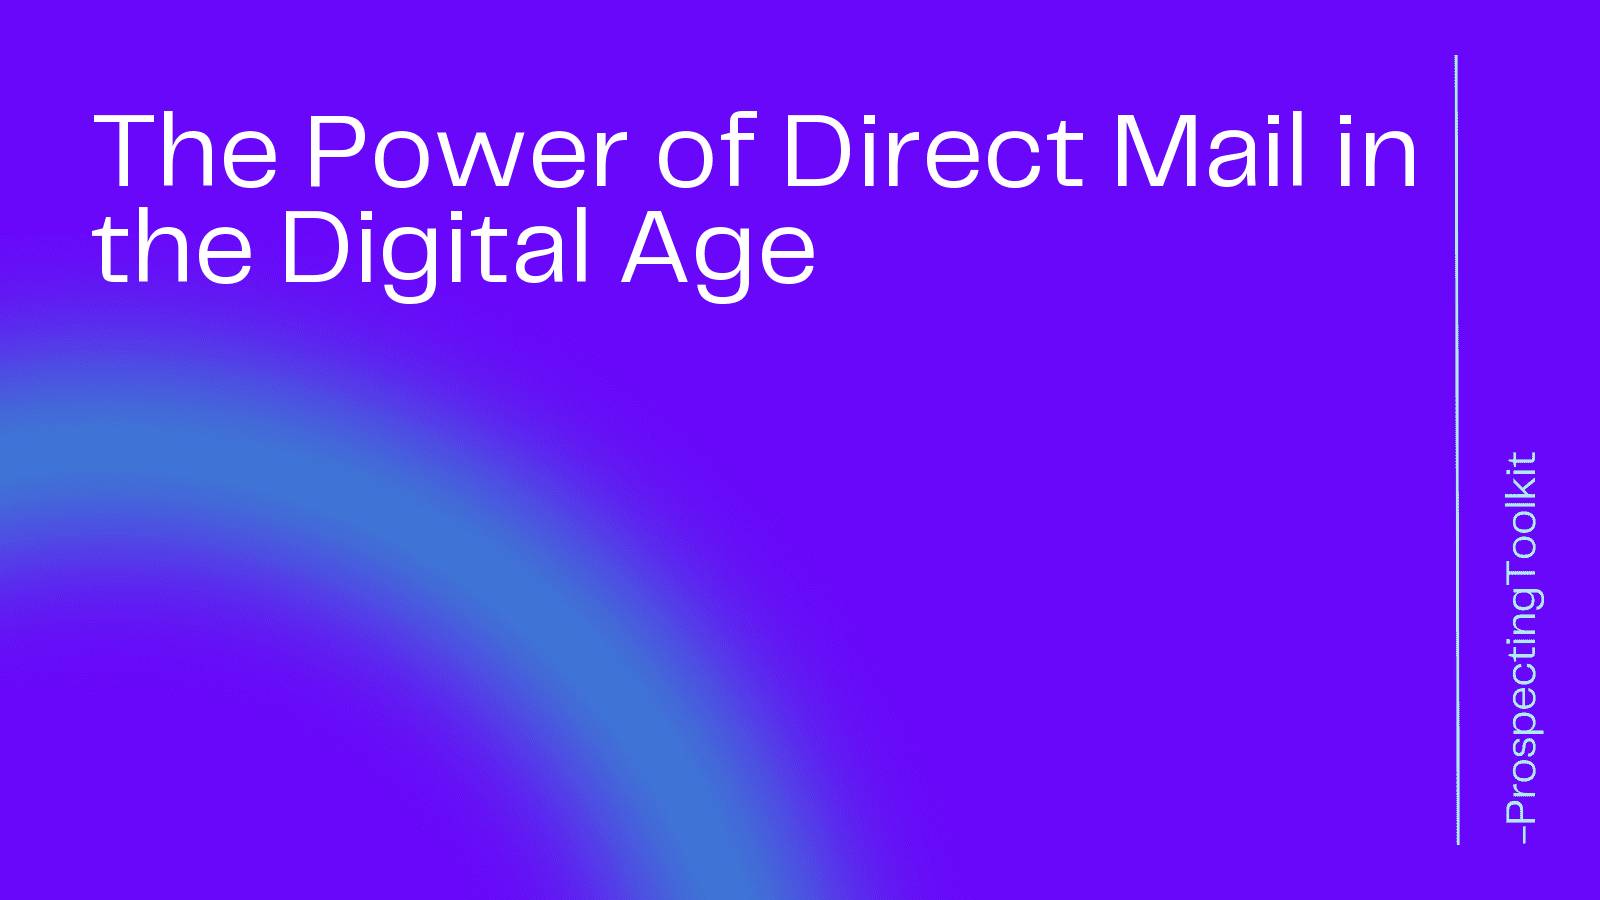 The Power of Direct Mail in the Digital Age